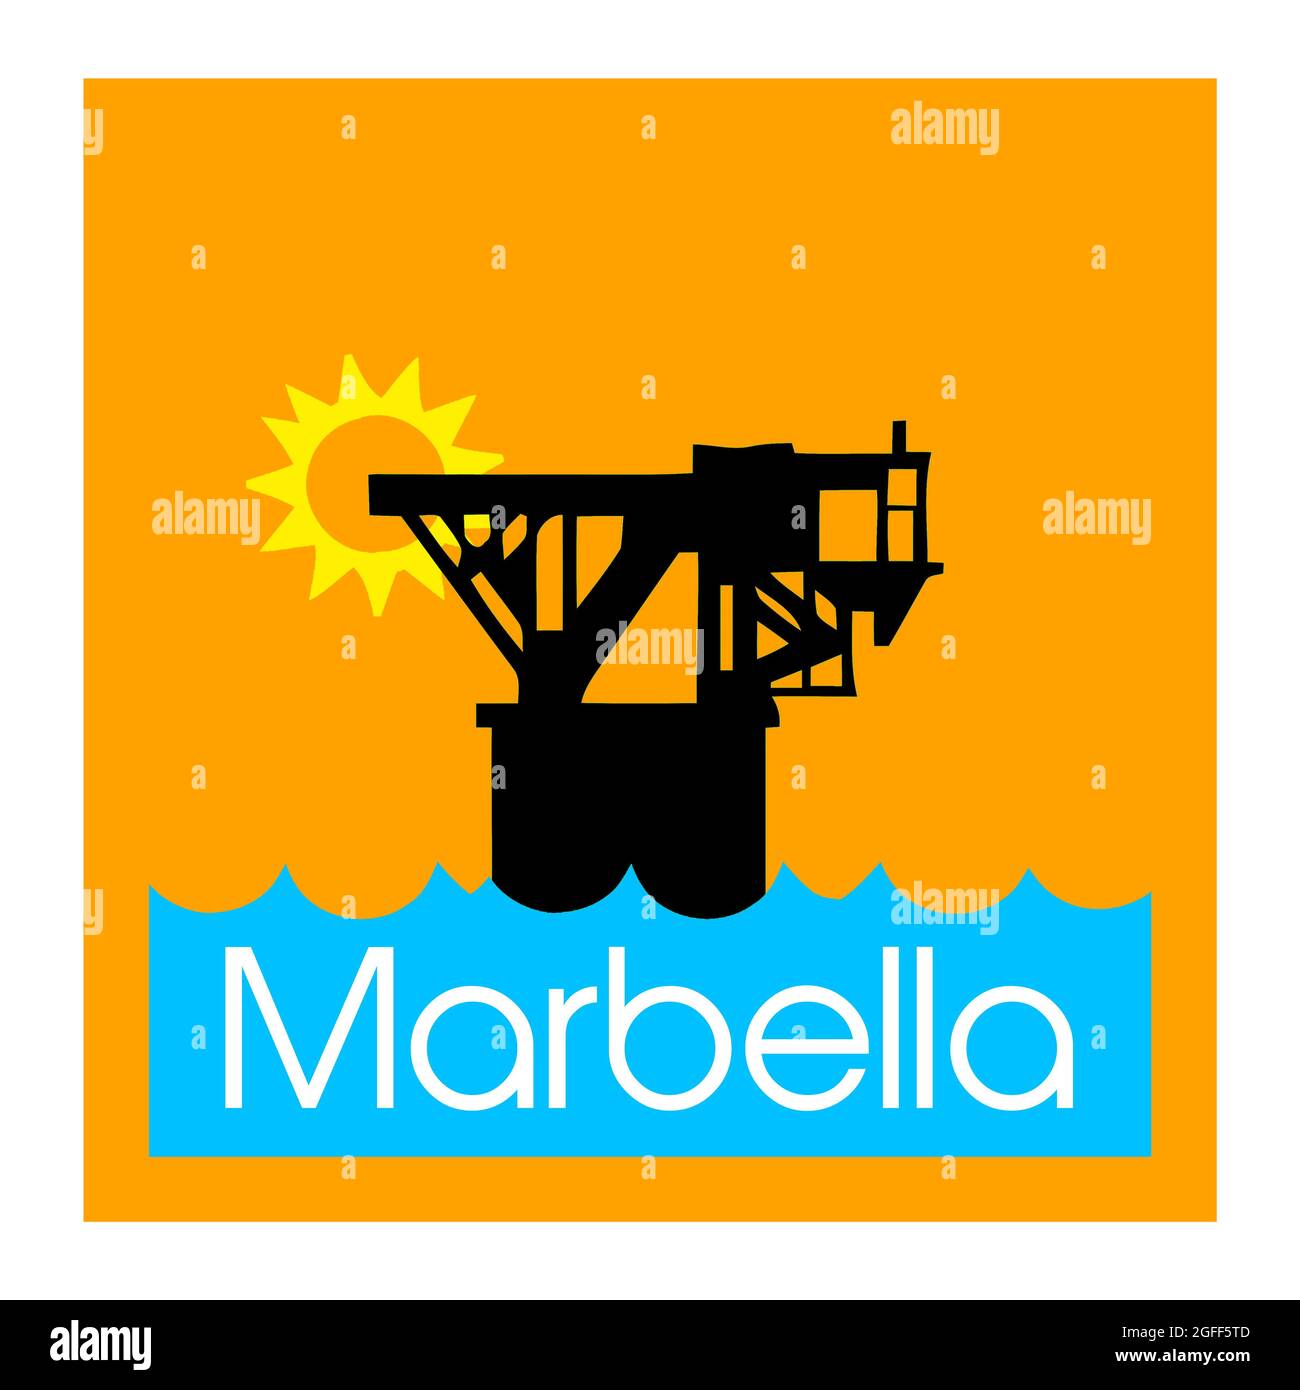 Marbella in modern style. Simple logo for souvenirs, Playa del Cablecalbe Stock Photo